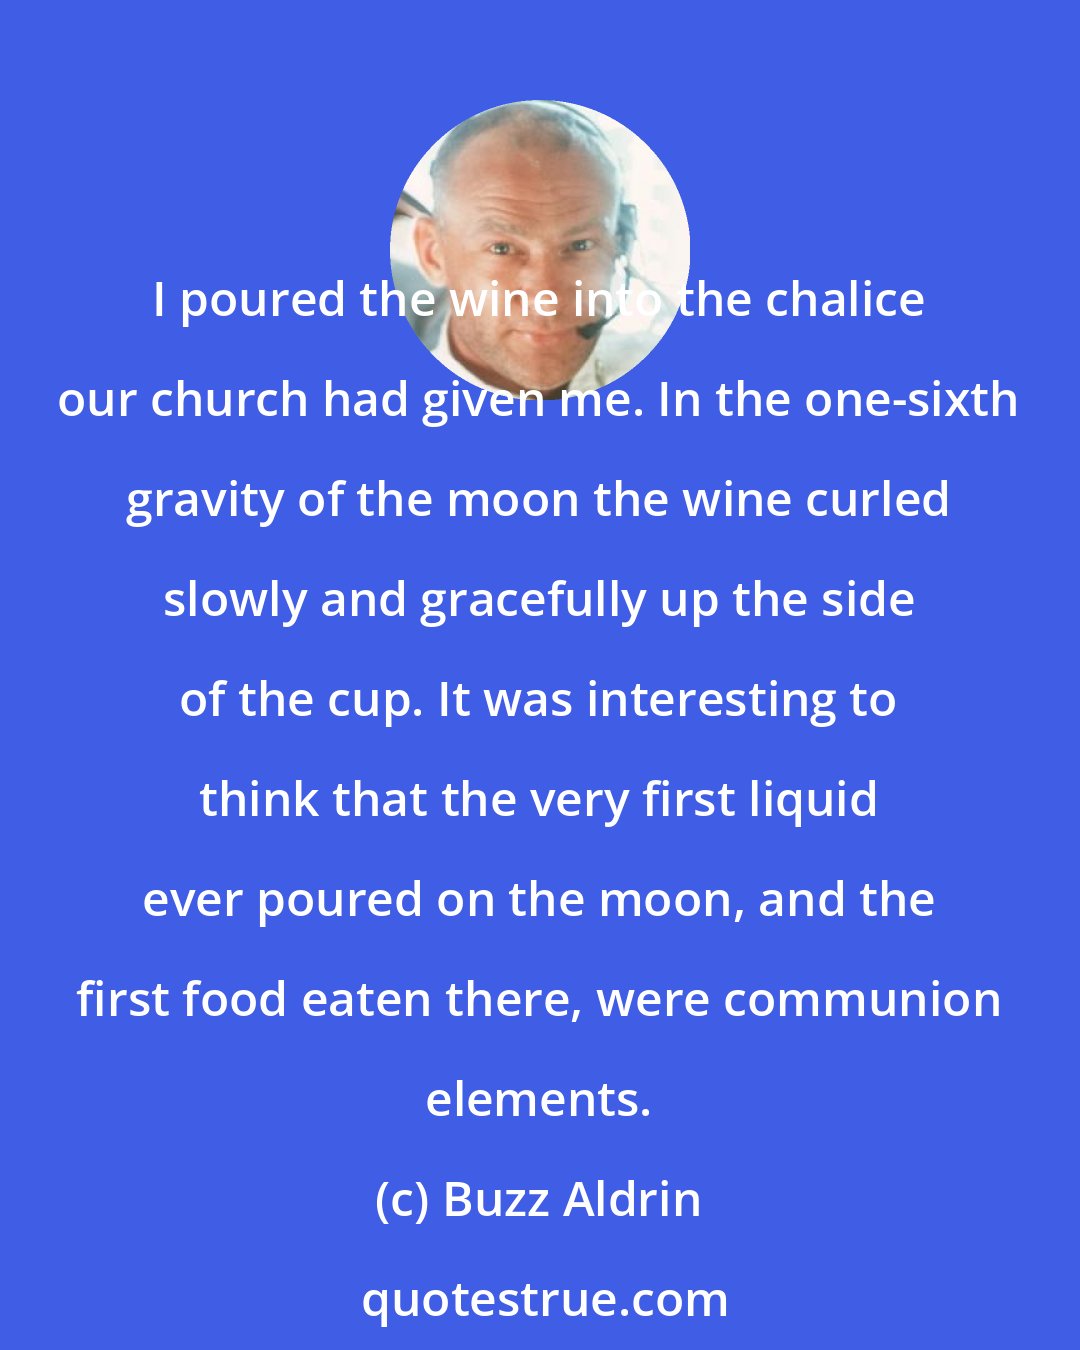 Buzz Aldrin: I poured the wine into the chalice our church had given me. In the one-sixth gravity of the moon the wine curled slowly and gracefully up the side of the cup. It was interesting to think that the very first liquid ever poured on the moon, and the first food eaten there, were communion elements.